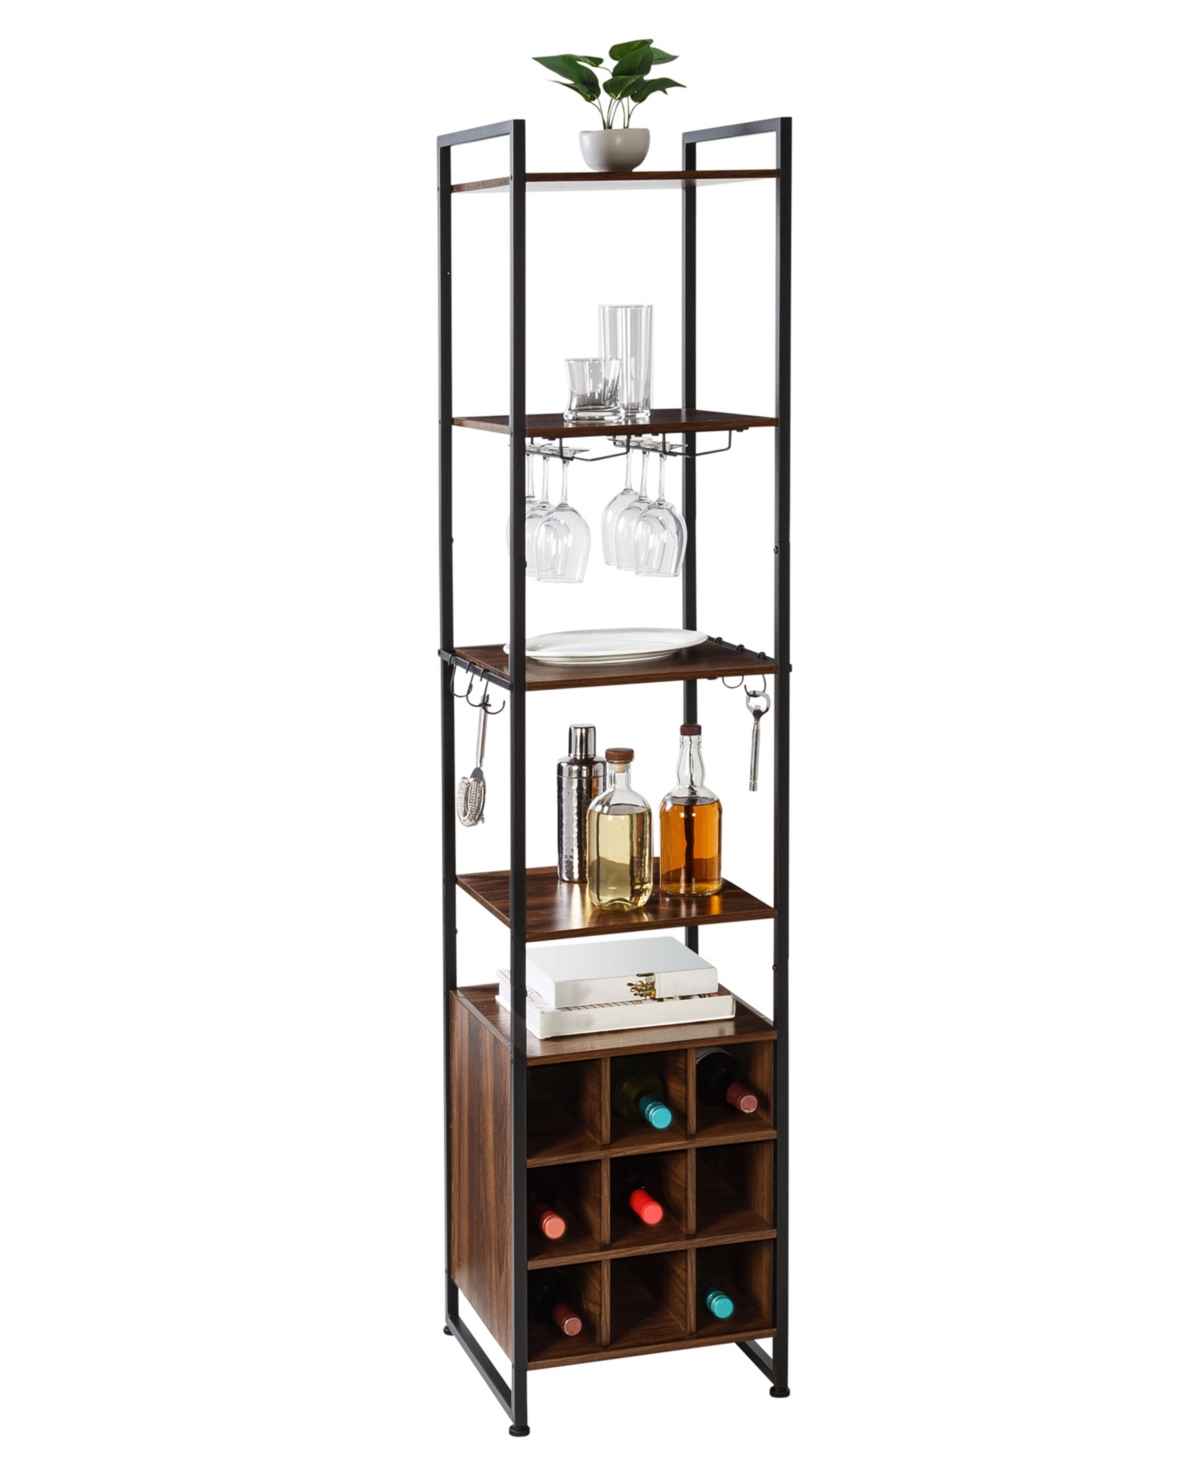 Honey Can Do Free-standing Wine Bar Storage Tower In Black